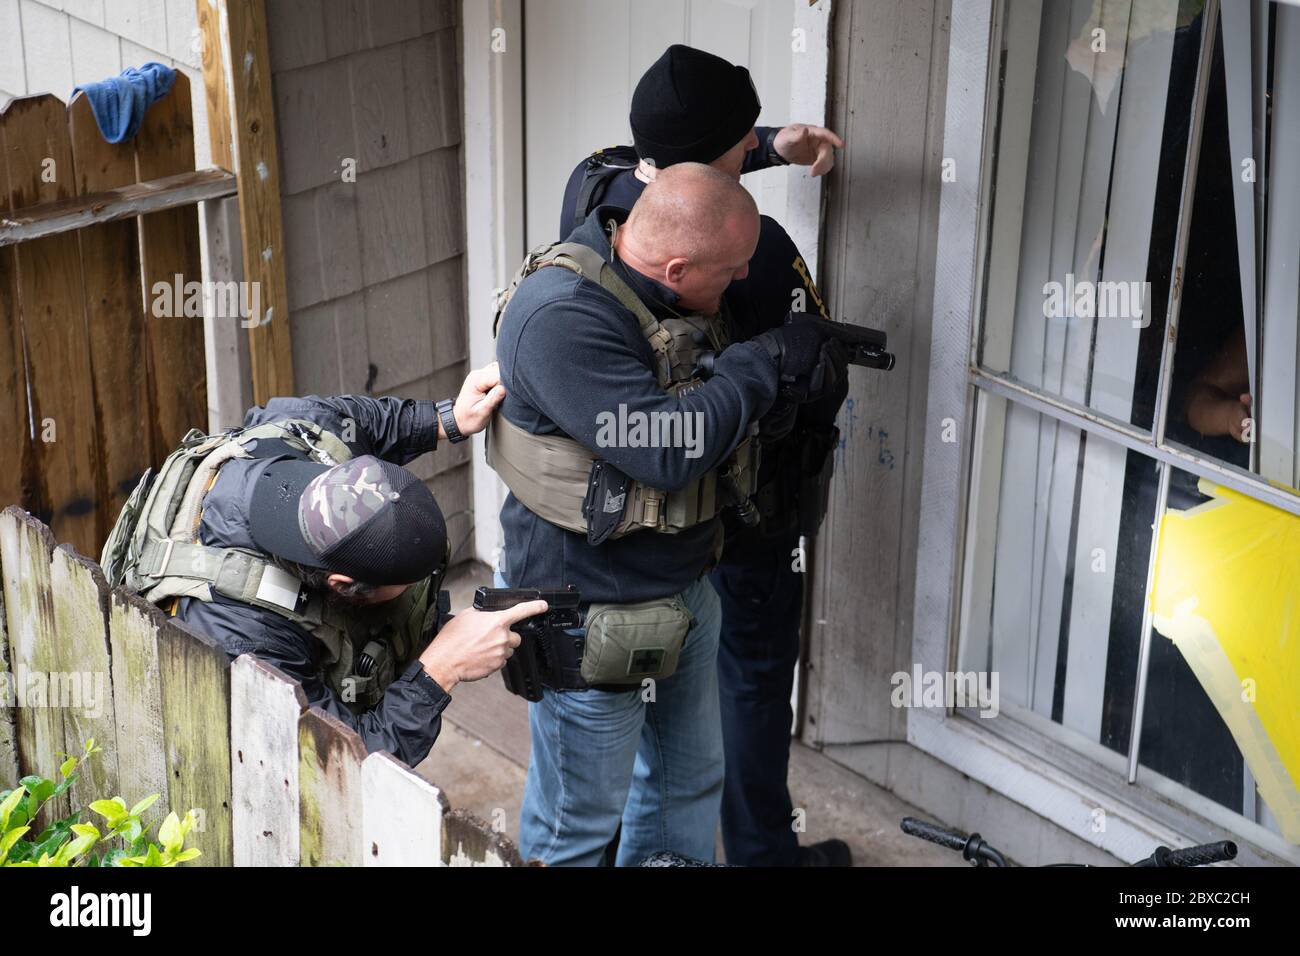 U.S. Marshals and Houston police execute a No Knock warrant in search of a fugitive during the 90-day, multi-state Operation Triple Beam November 14, 2019 in Houston, Texas. The operation resulted in more than 6,000 arrests in violence-plagued communities. Stock Photo